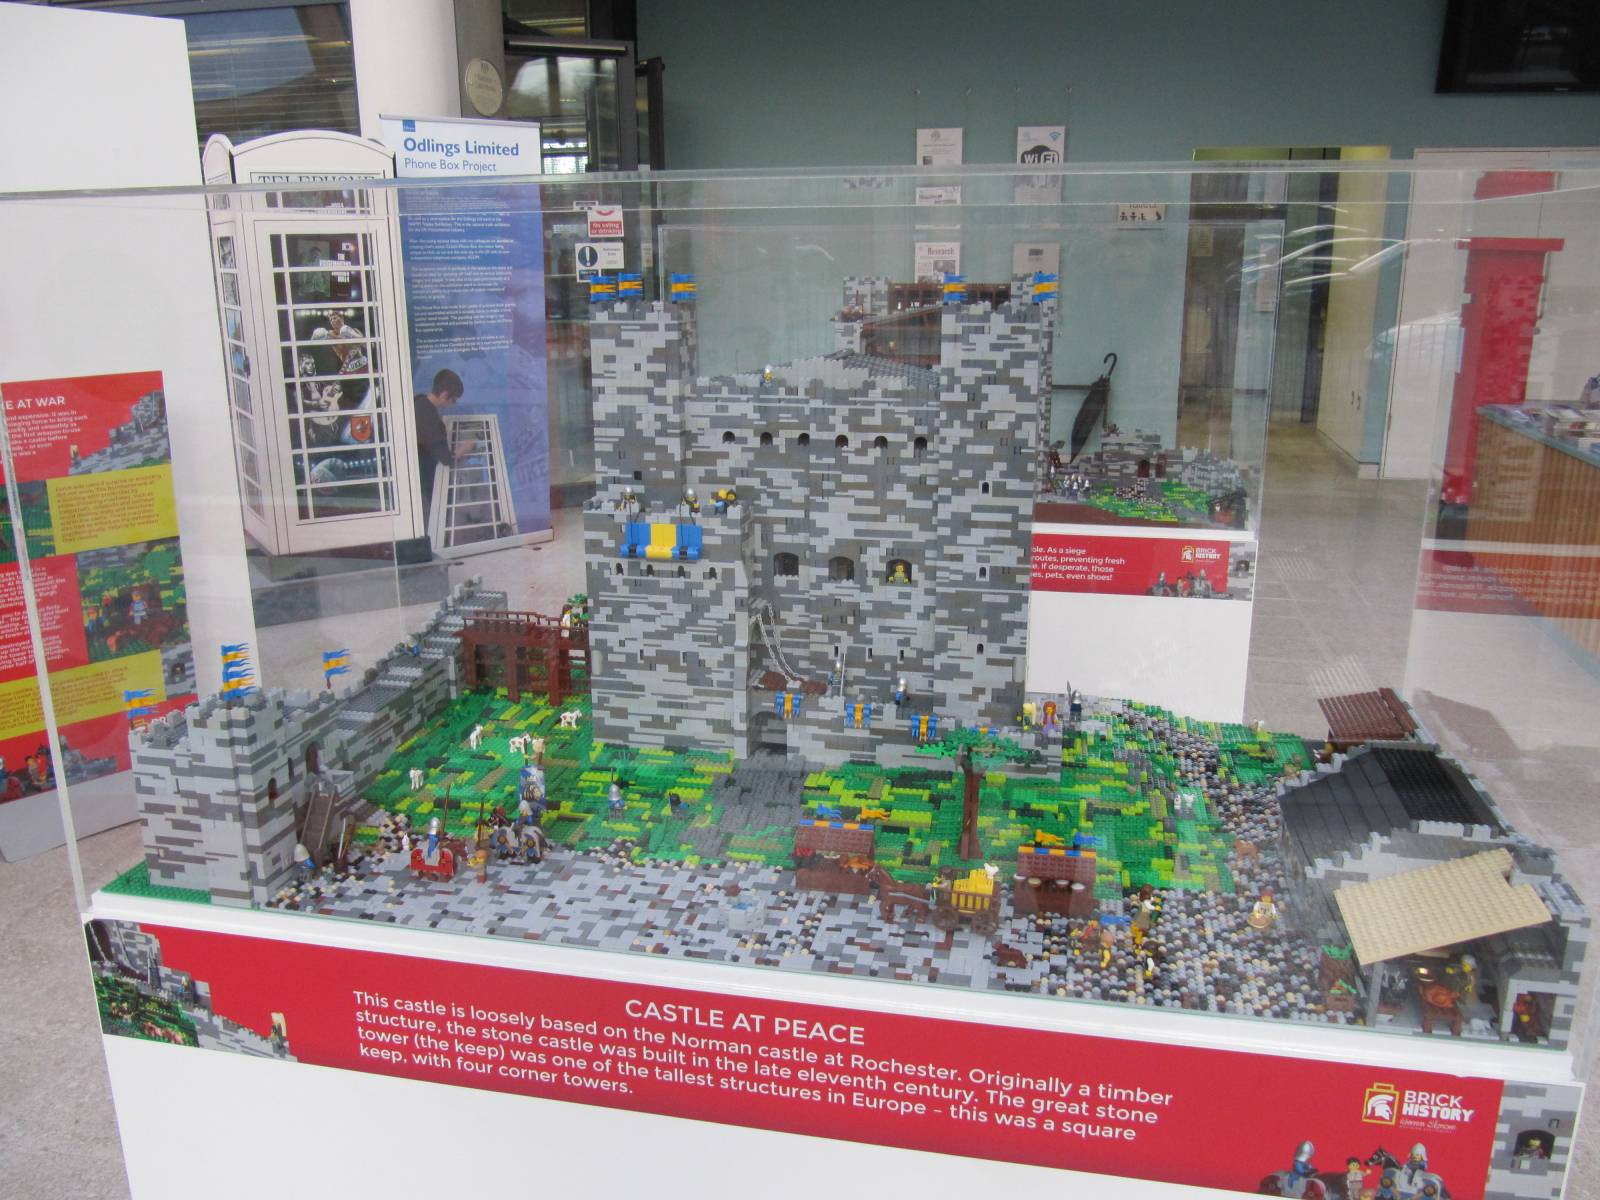 Brick History, an exhibition of major historical milestones made entirely from Lego, is on display at the Hull History Centre until Saturday 9 March.